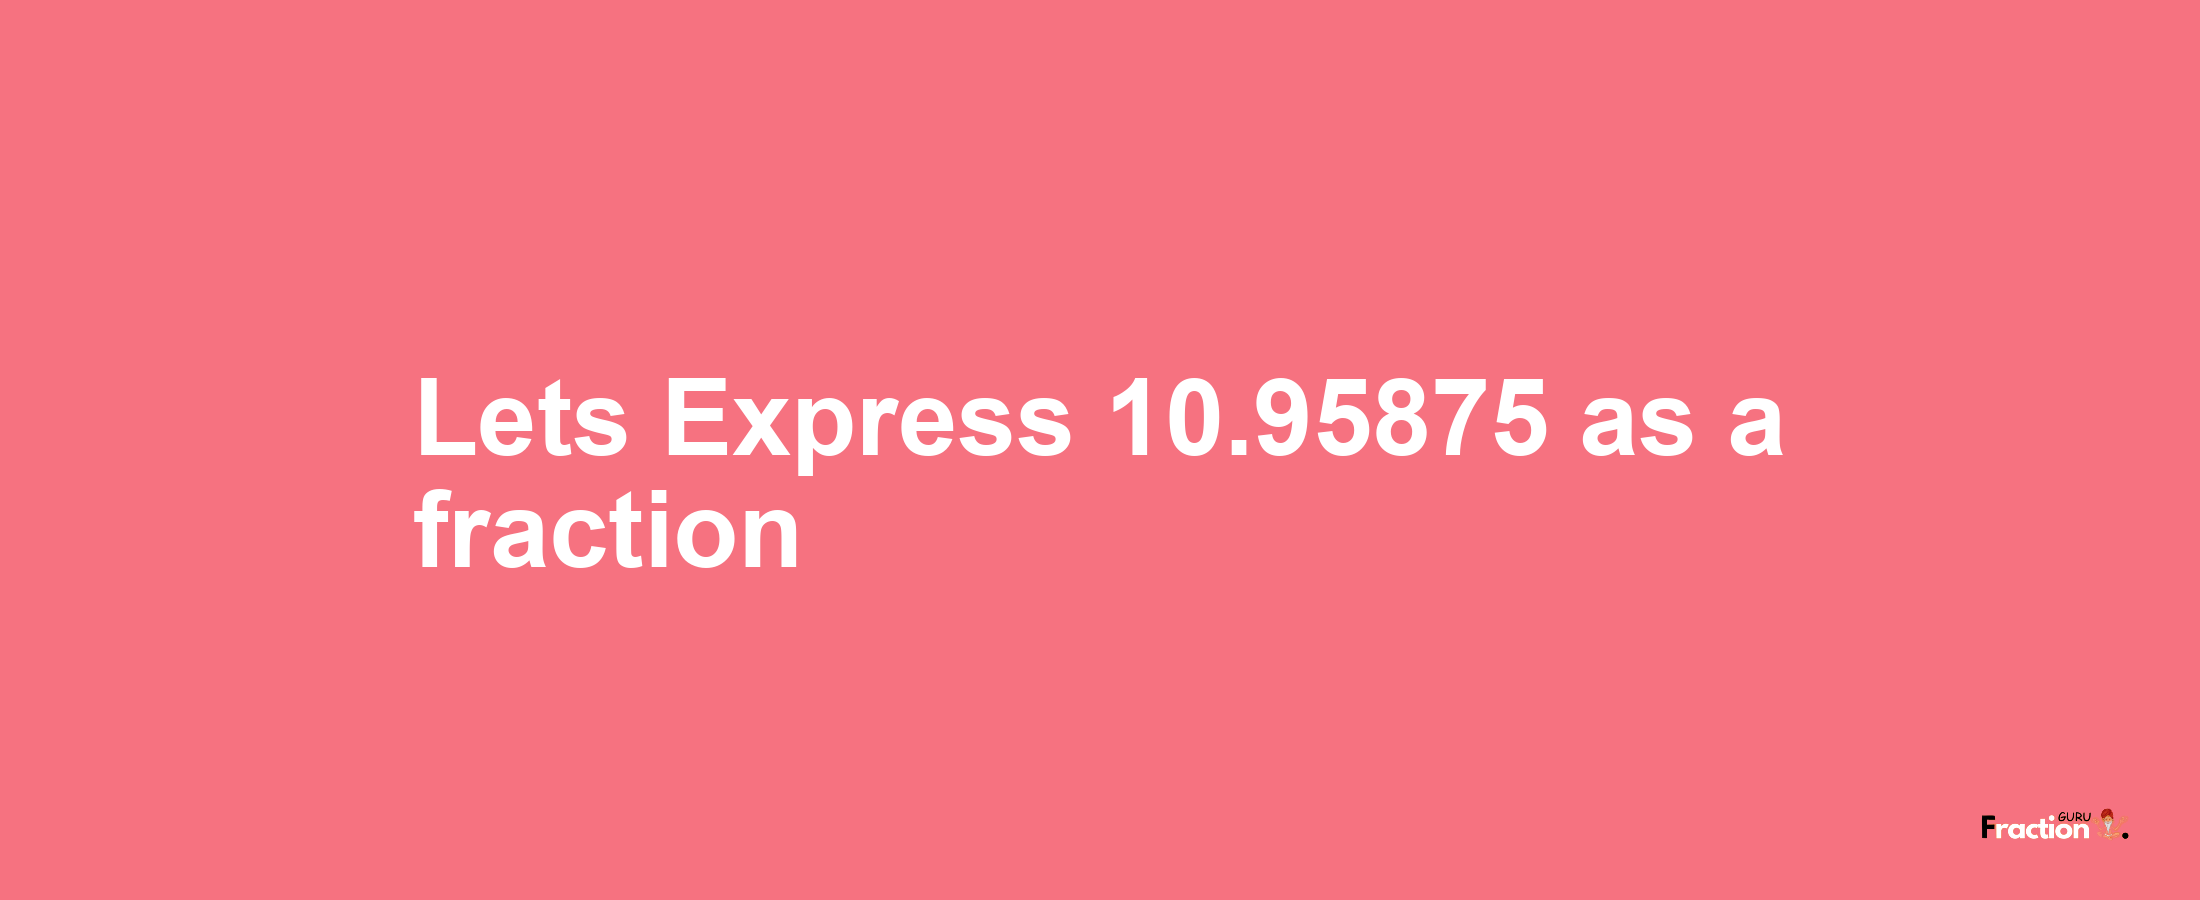 Lets Express 10.95875 as afraction